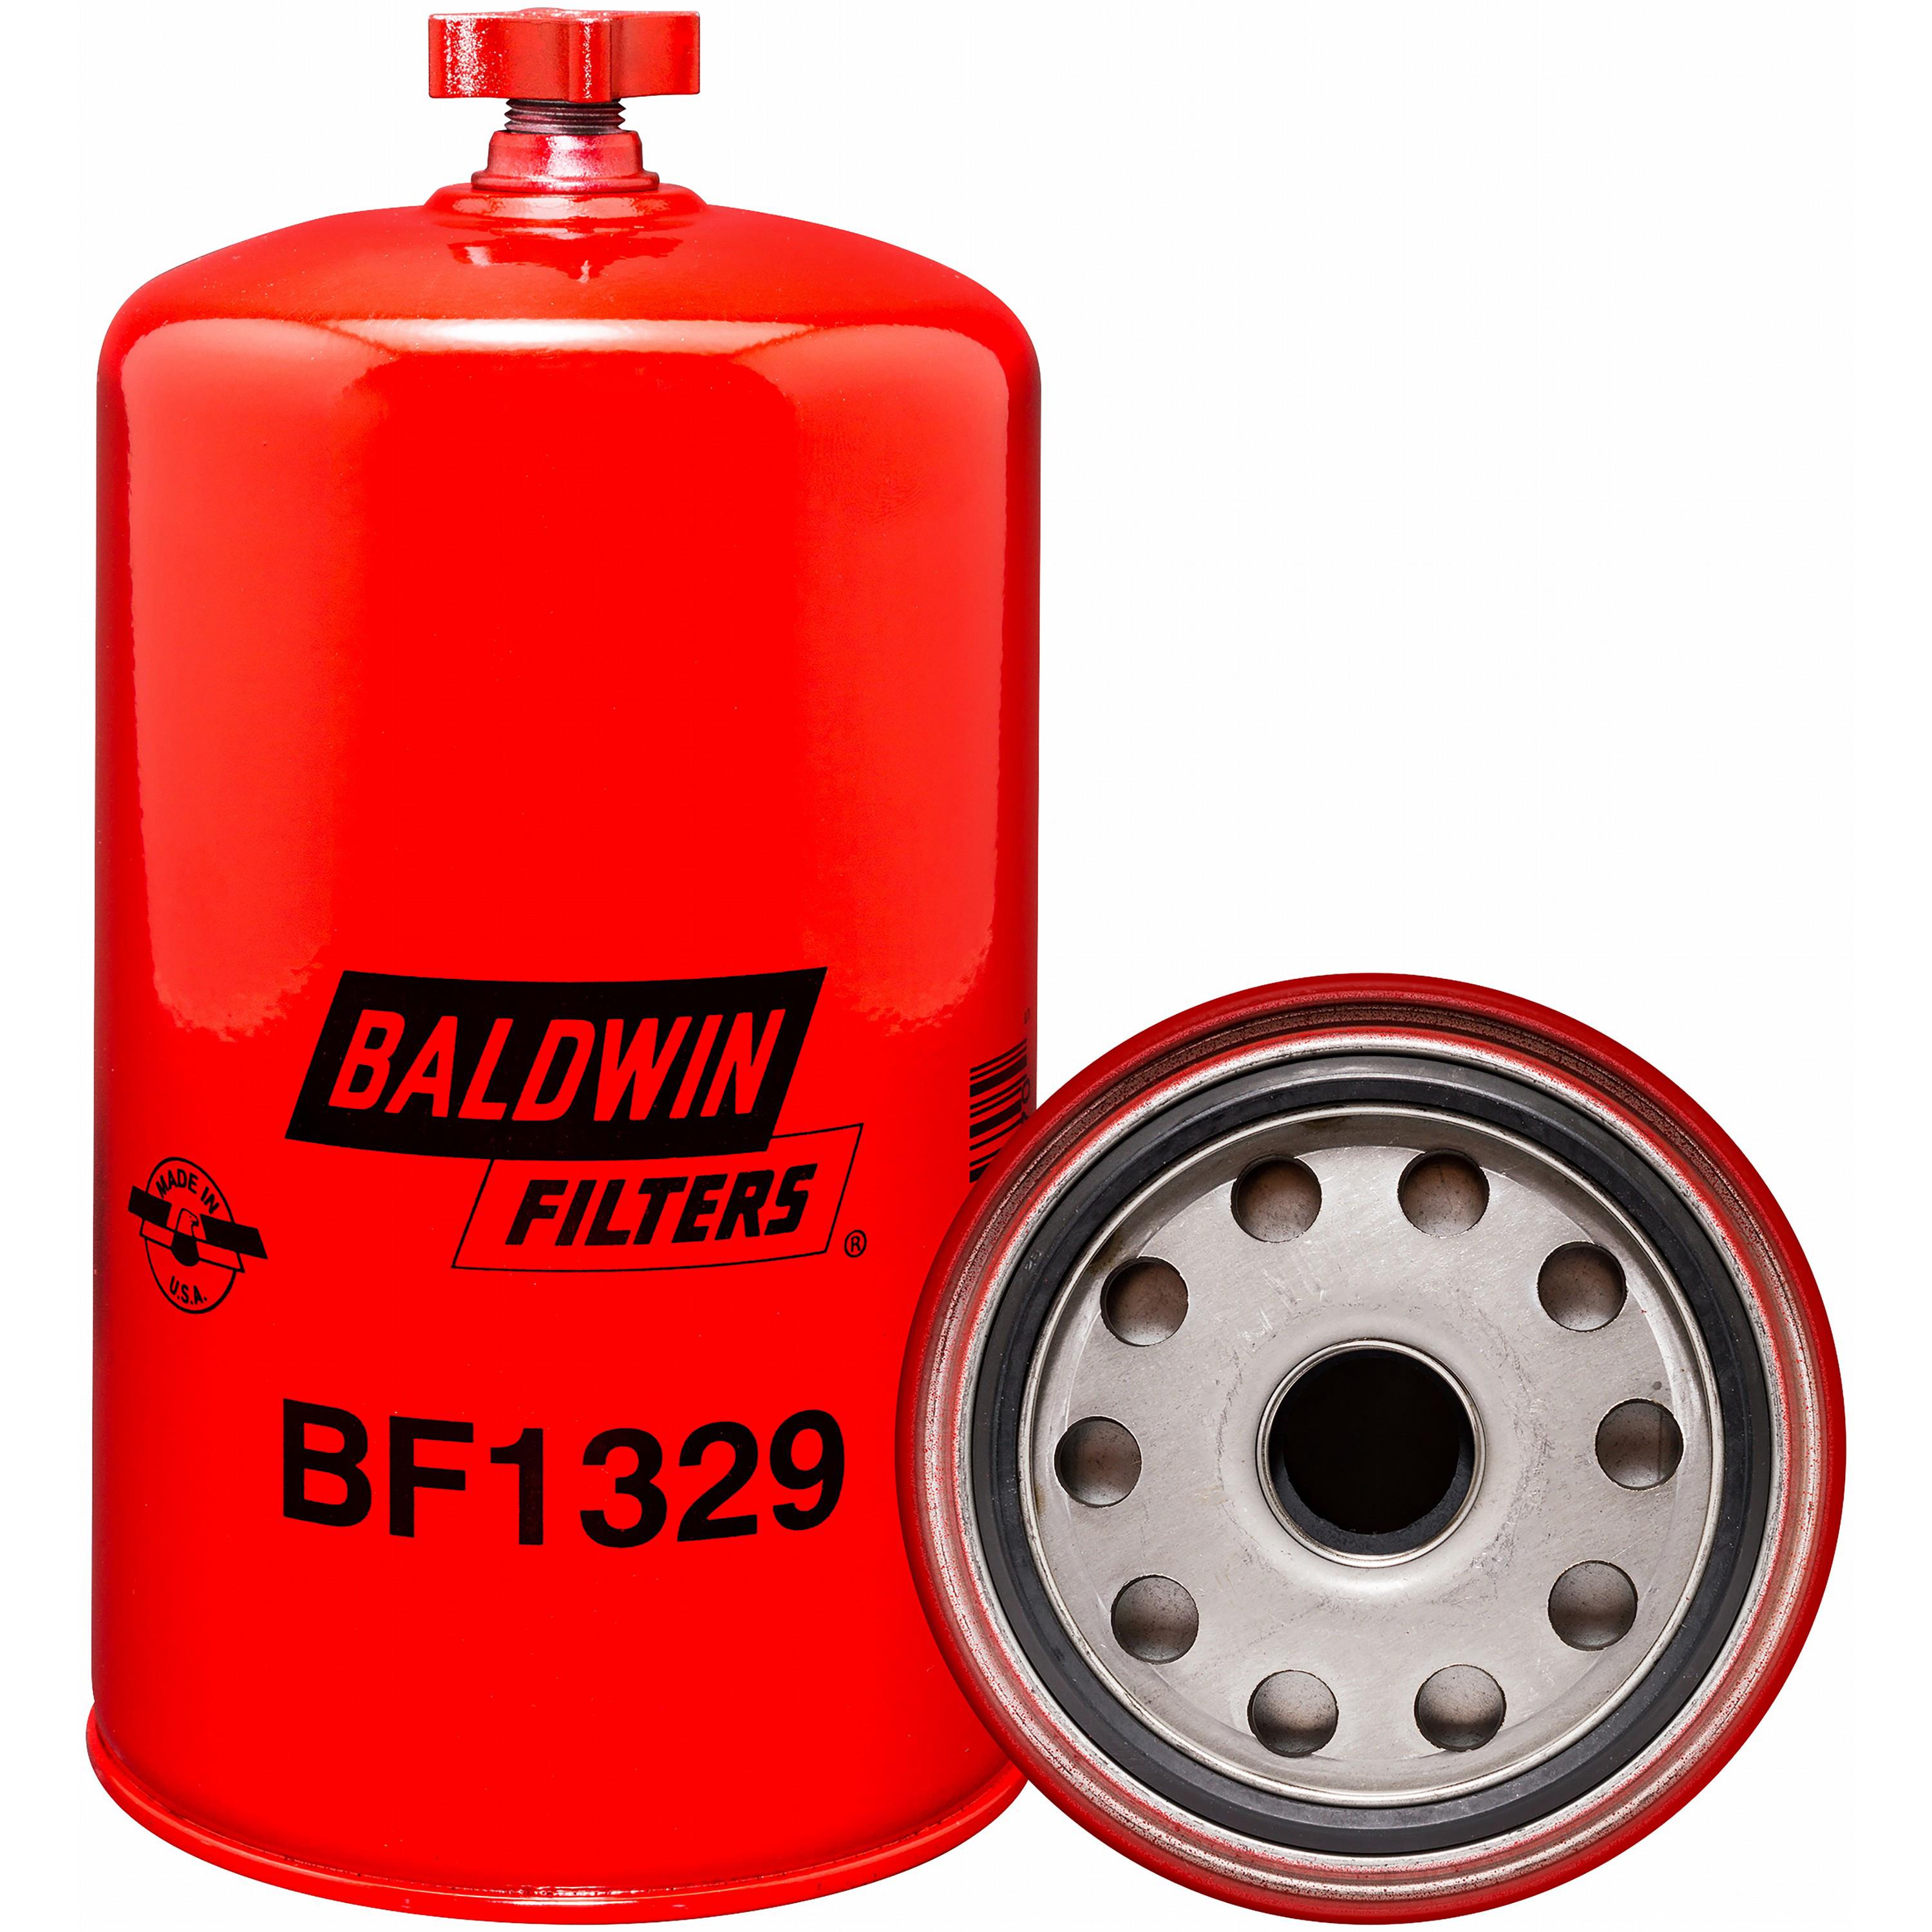 bbf1329-baldwin-fuel-filter-primary-spin-on-filters